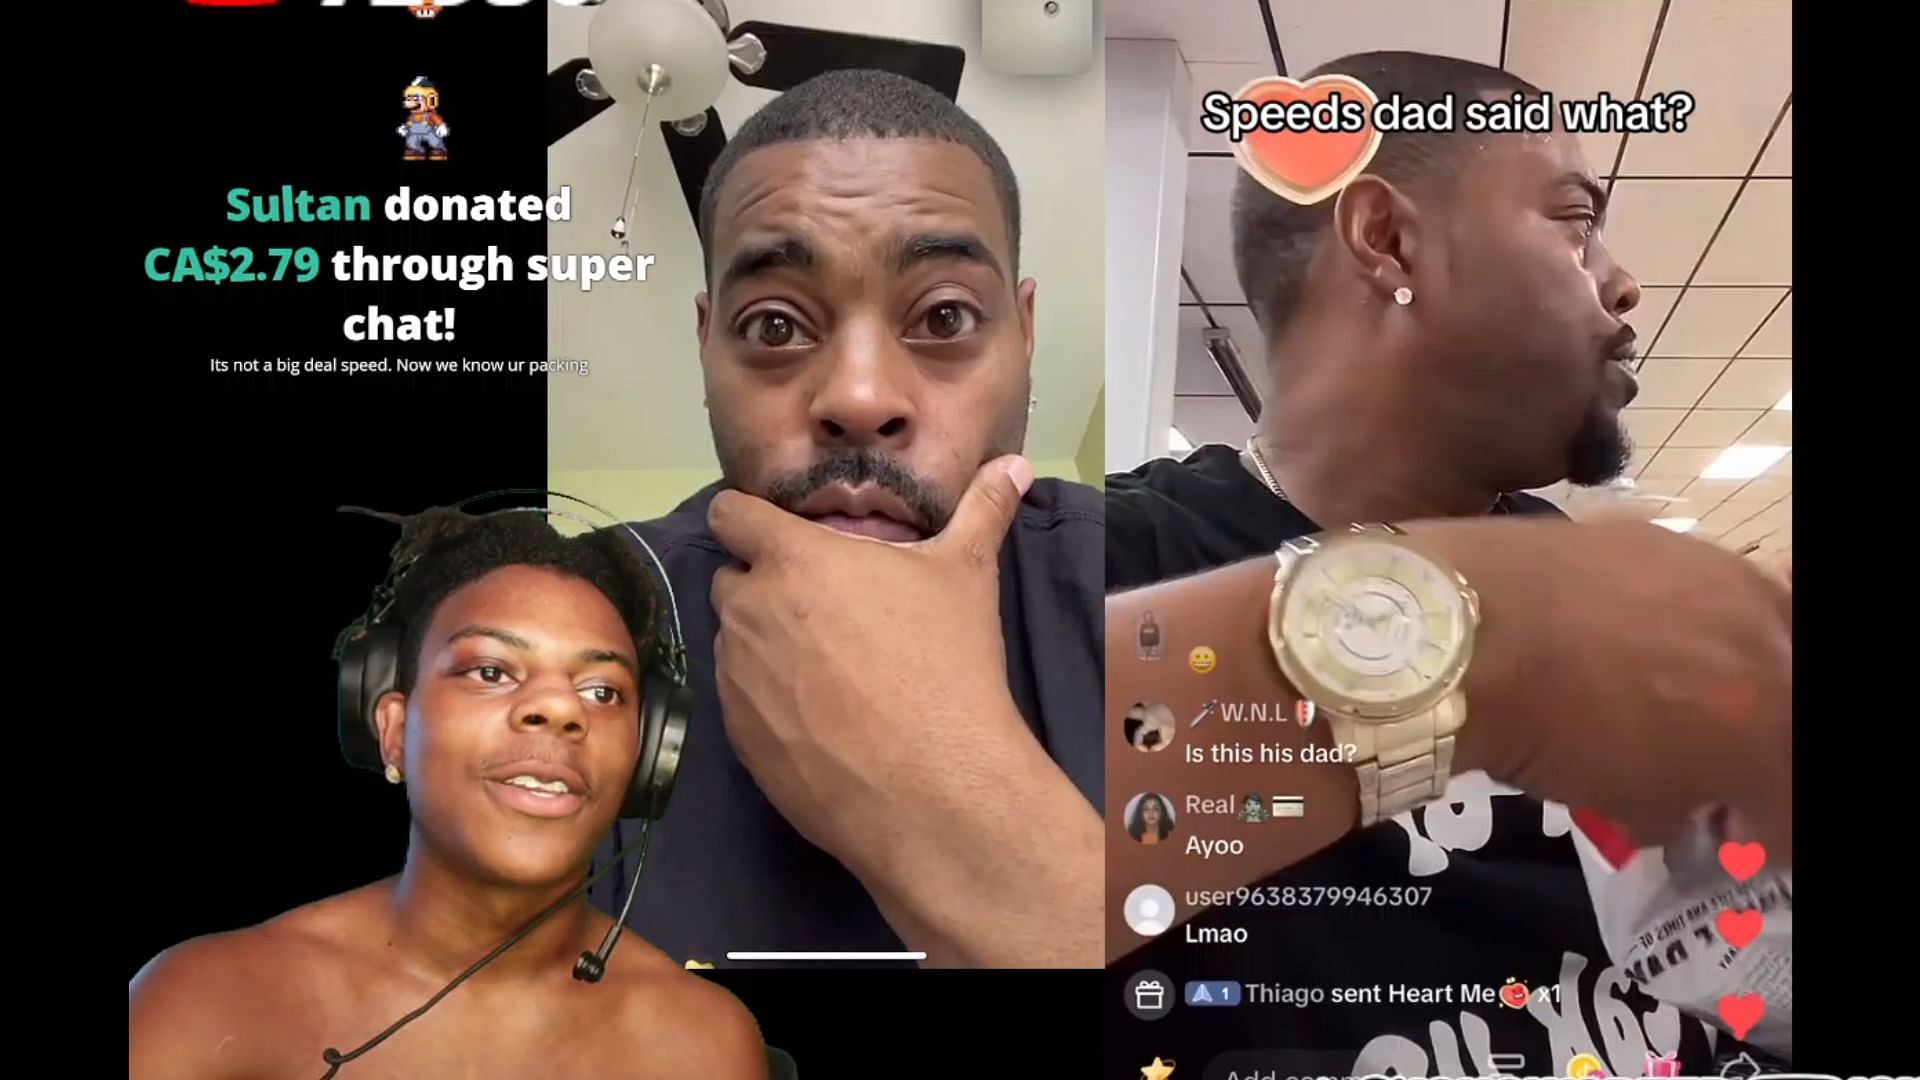 IShowSpeed confronts father for singing about his wardrobe malfunction on TikTok (Image viaI IShowSpeed/YouTube)